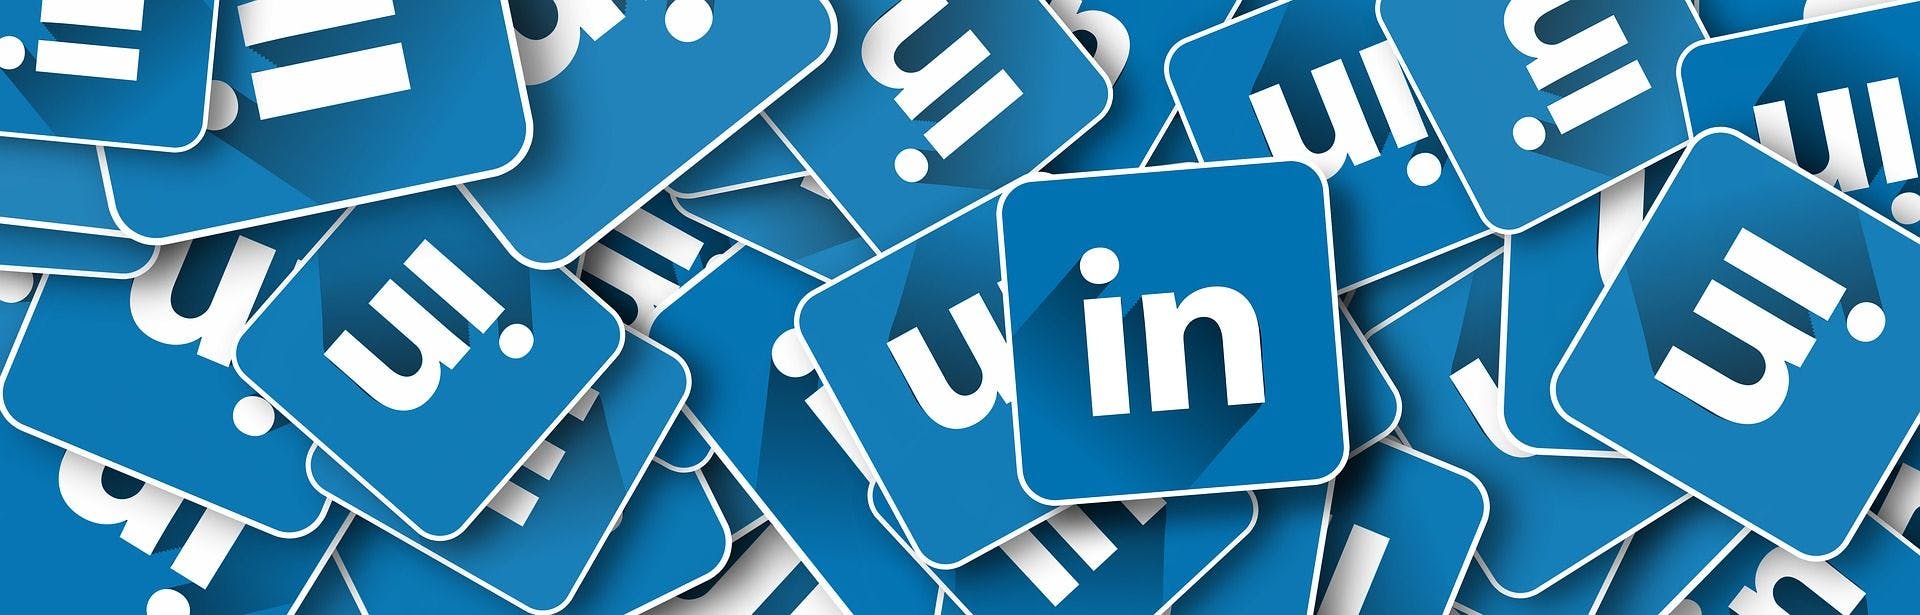 featured image - Build Your Personal Brand on LinkedIn with These 5 Effective Tips